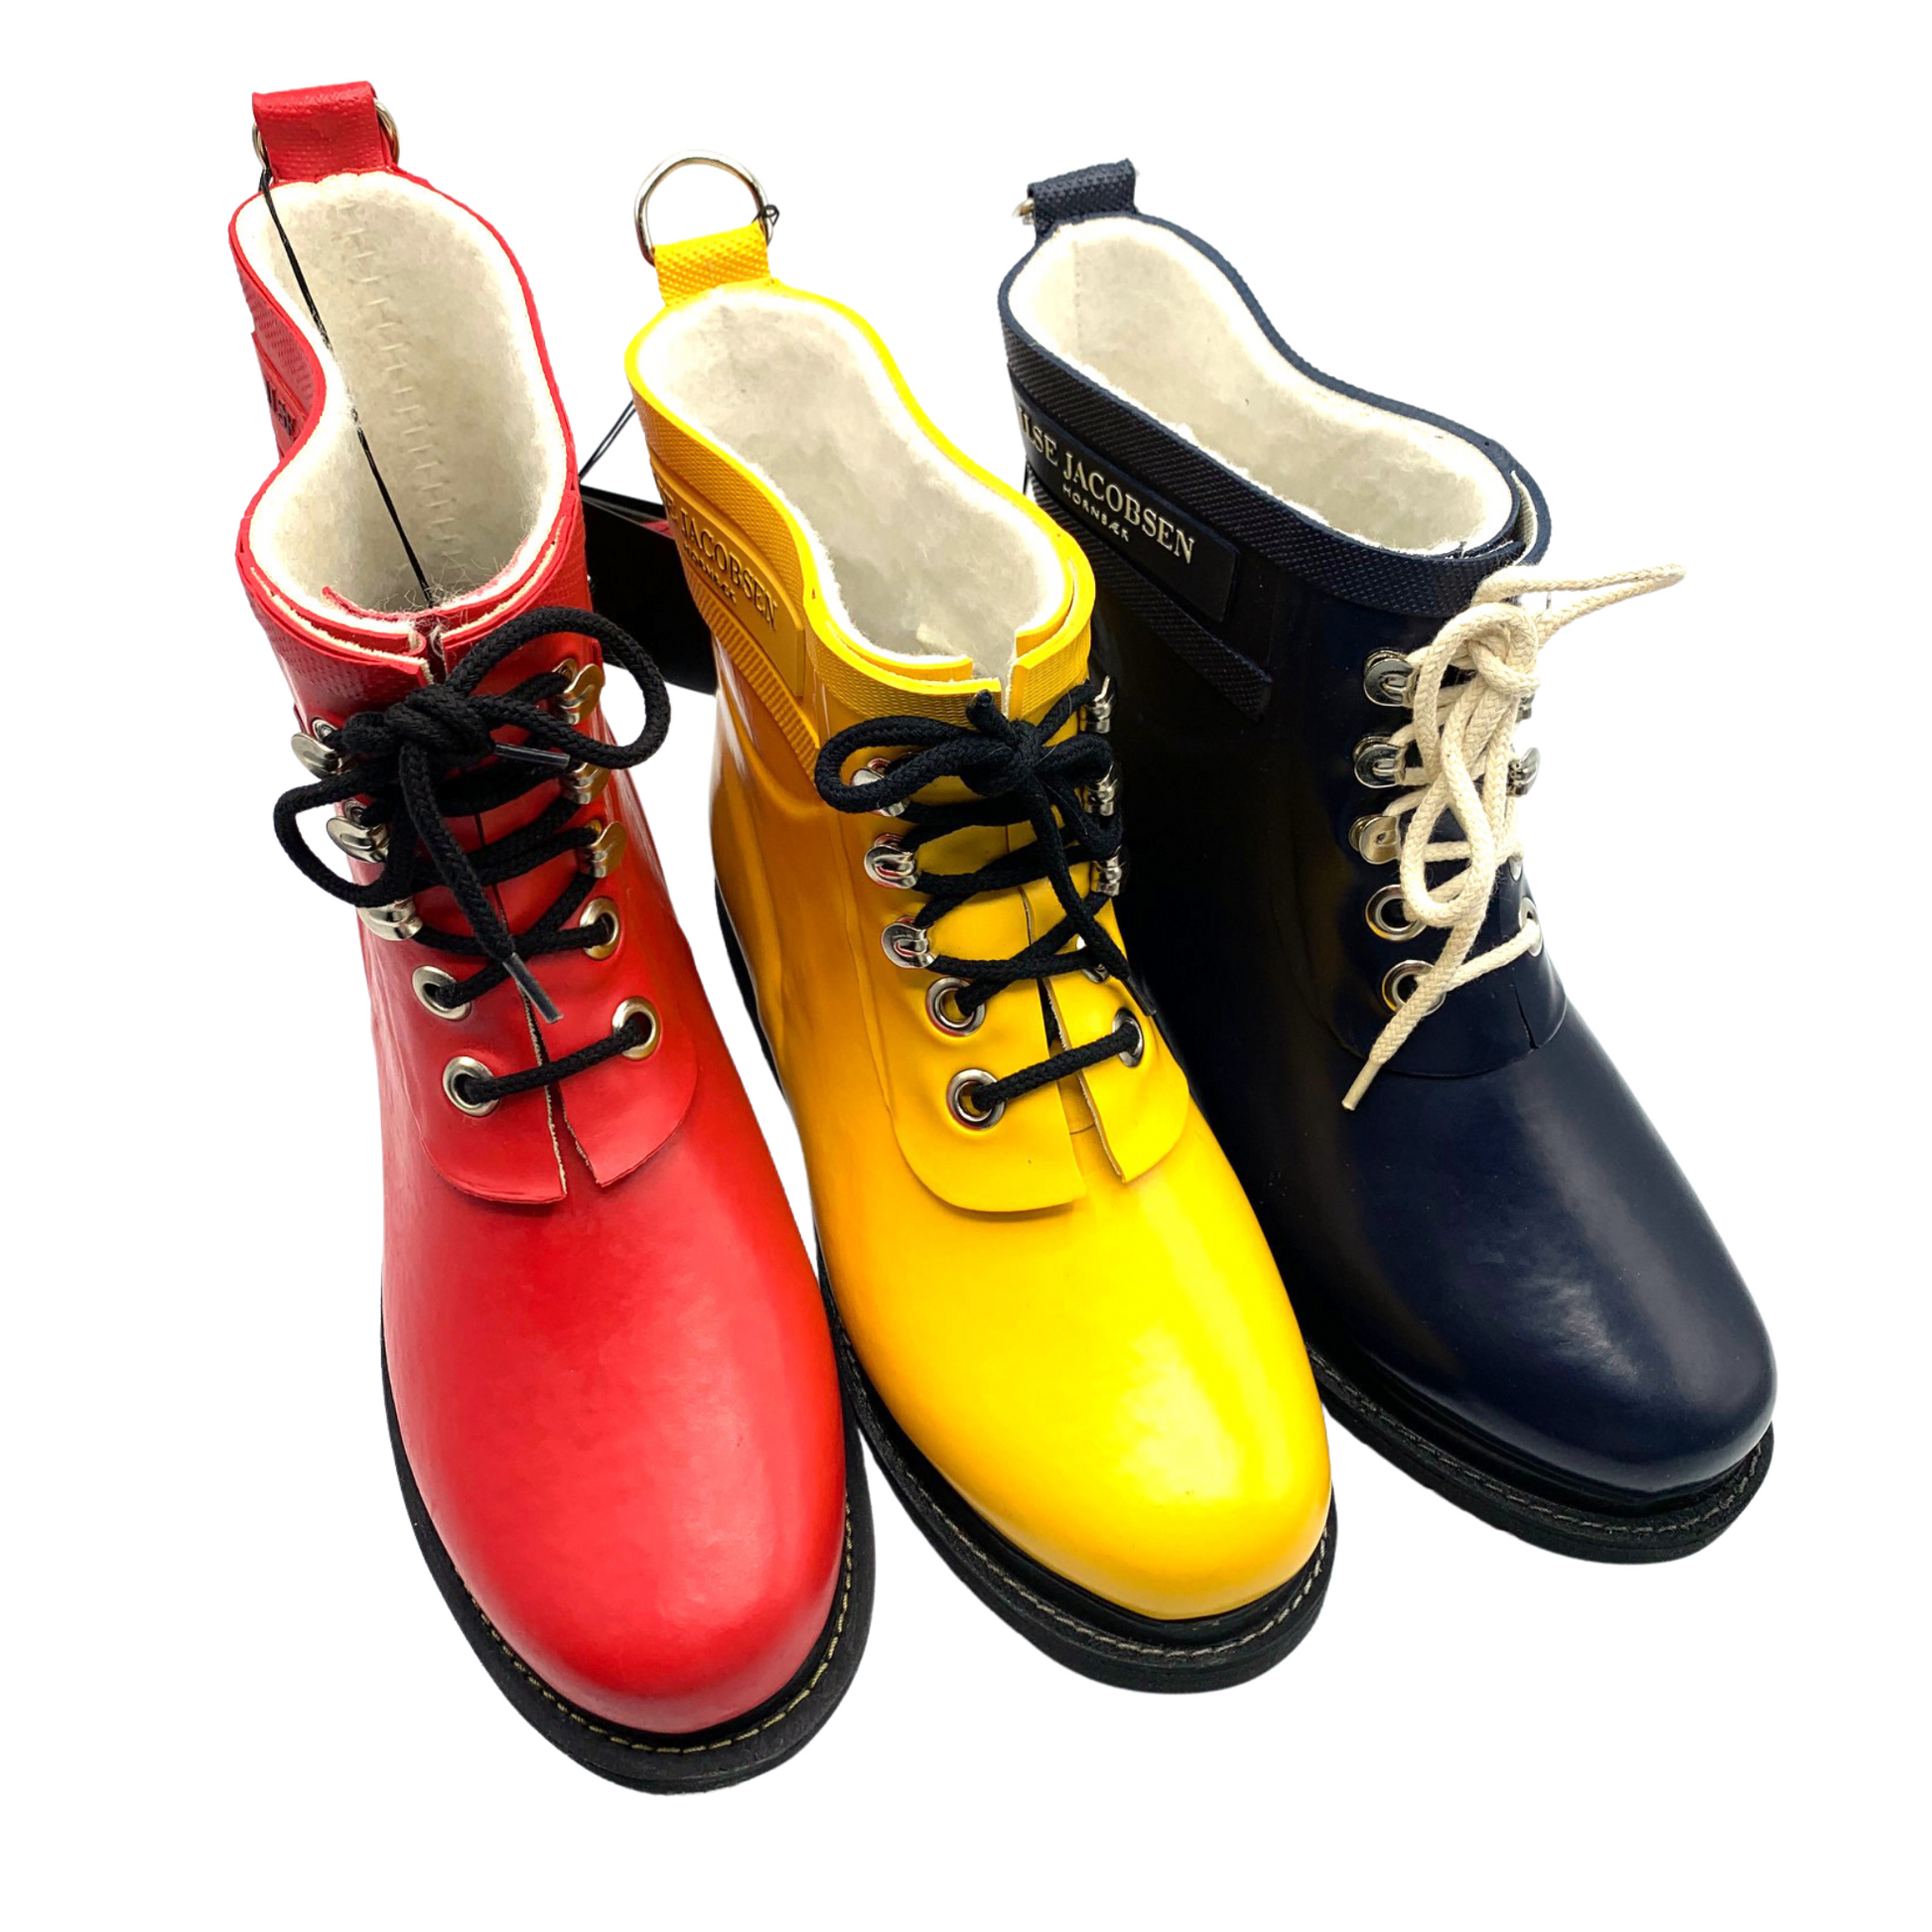 Three colourful rainboots, one red, one yellow, and one navy.